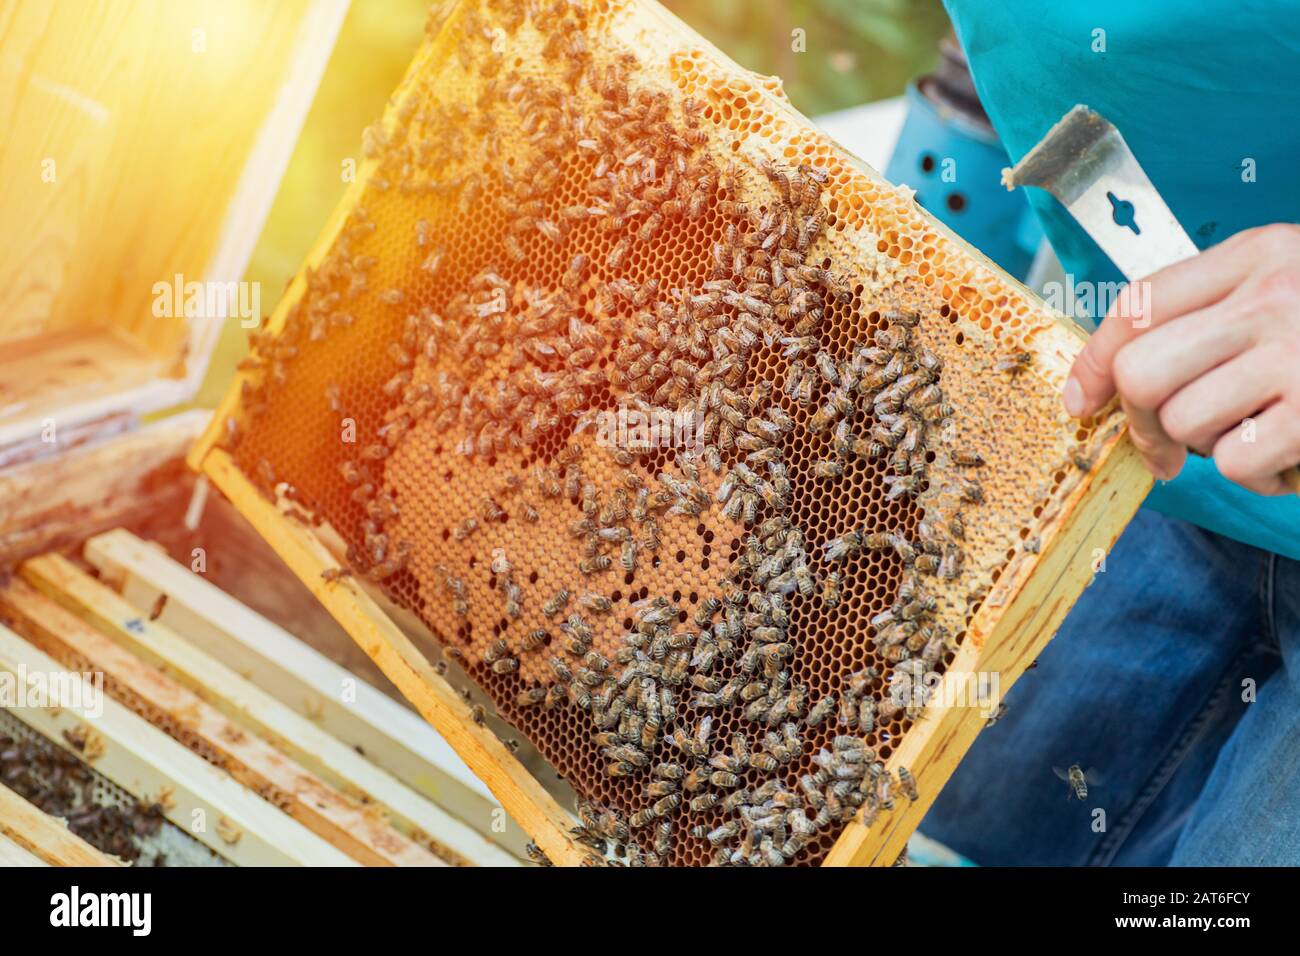 beekeeper with hive tool without gloves looks for overwintered queen on combframe with sealed brood. water-carrying bee on wooden frame. Stock Photo